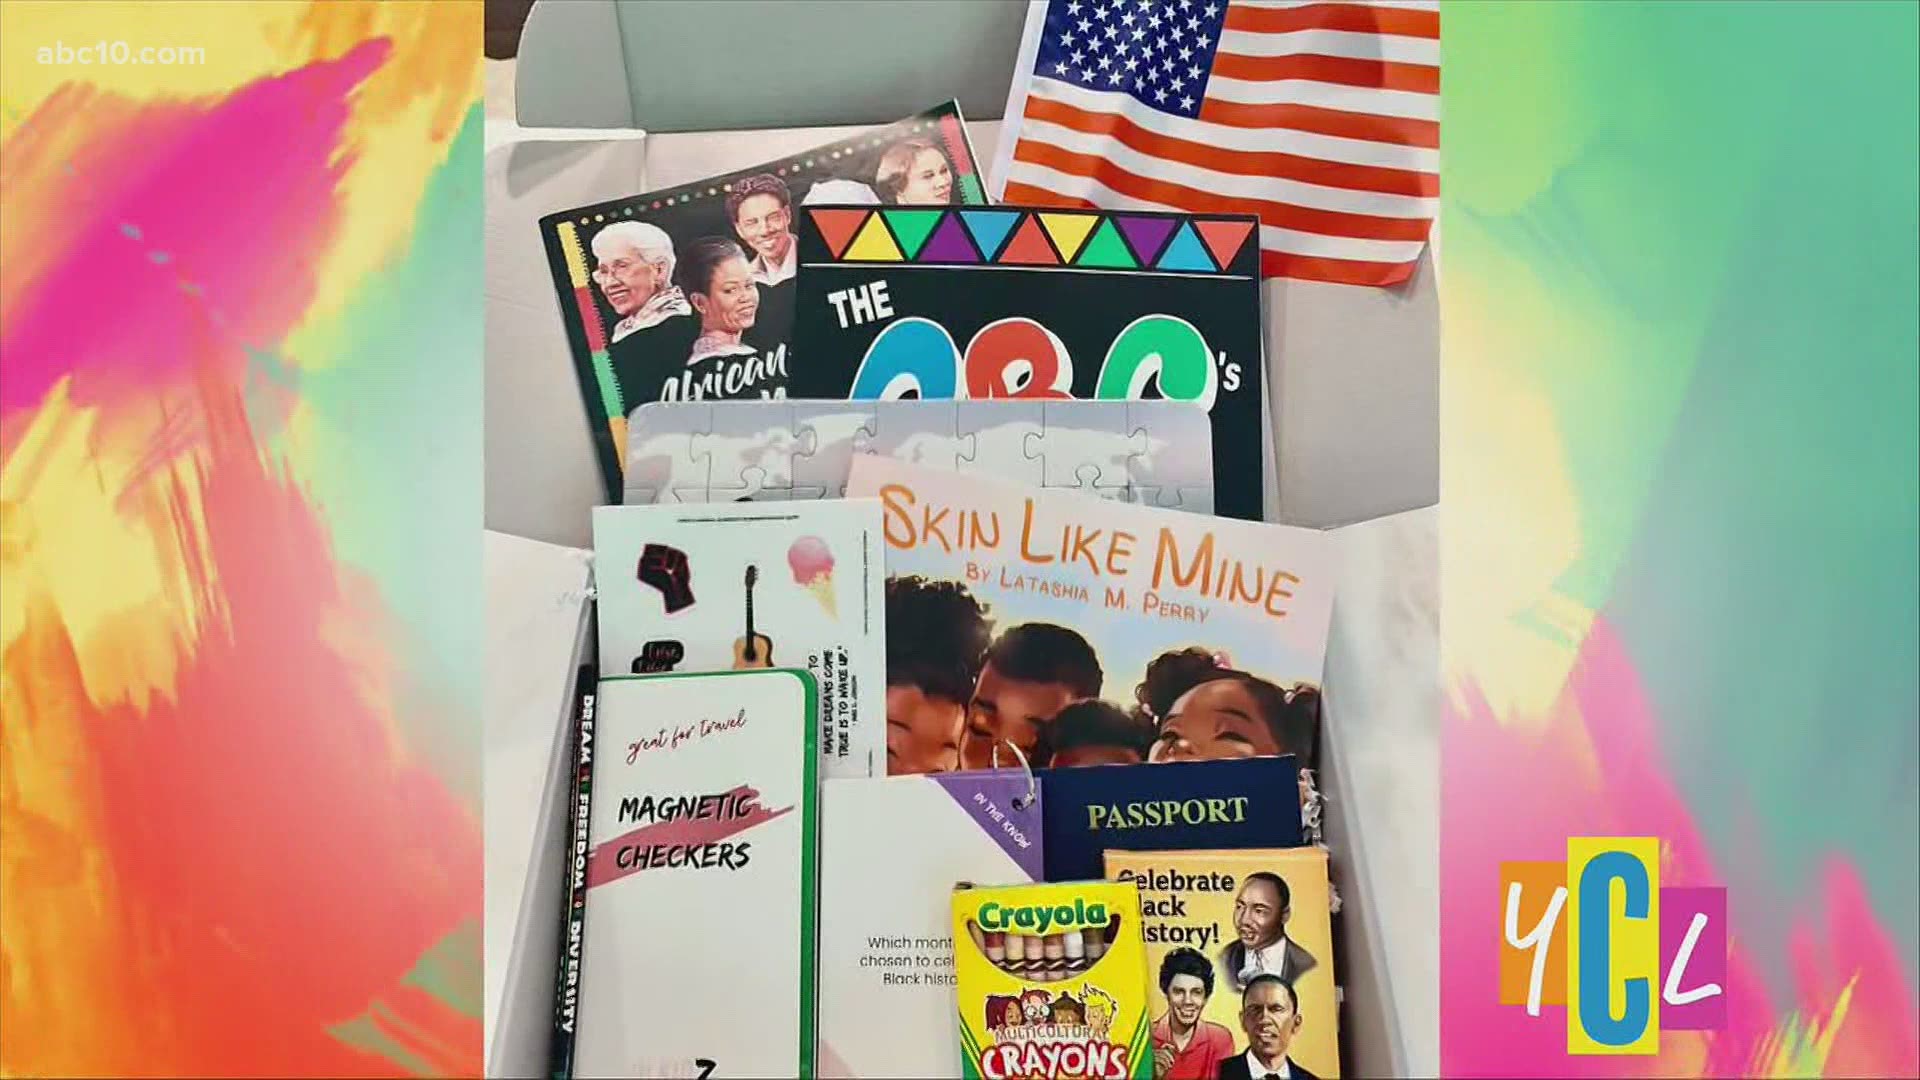 InKidz cultural boxes for children, including one focused on inventors, politicians, athletes and other remarkable people contributing to America’s Black culture.